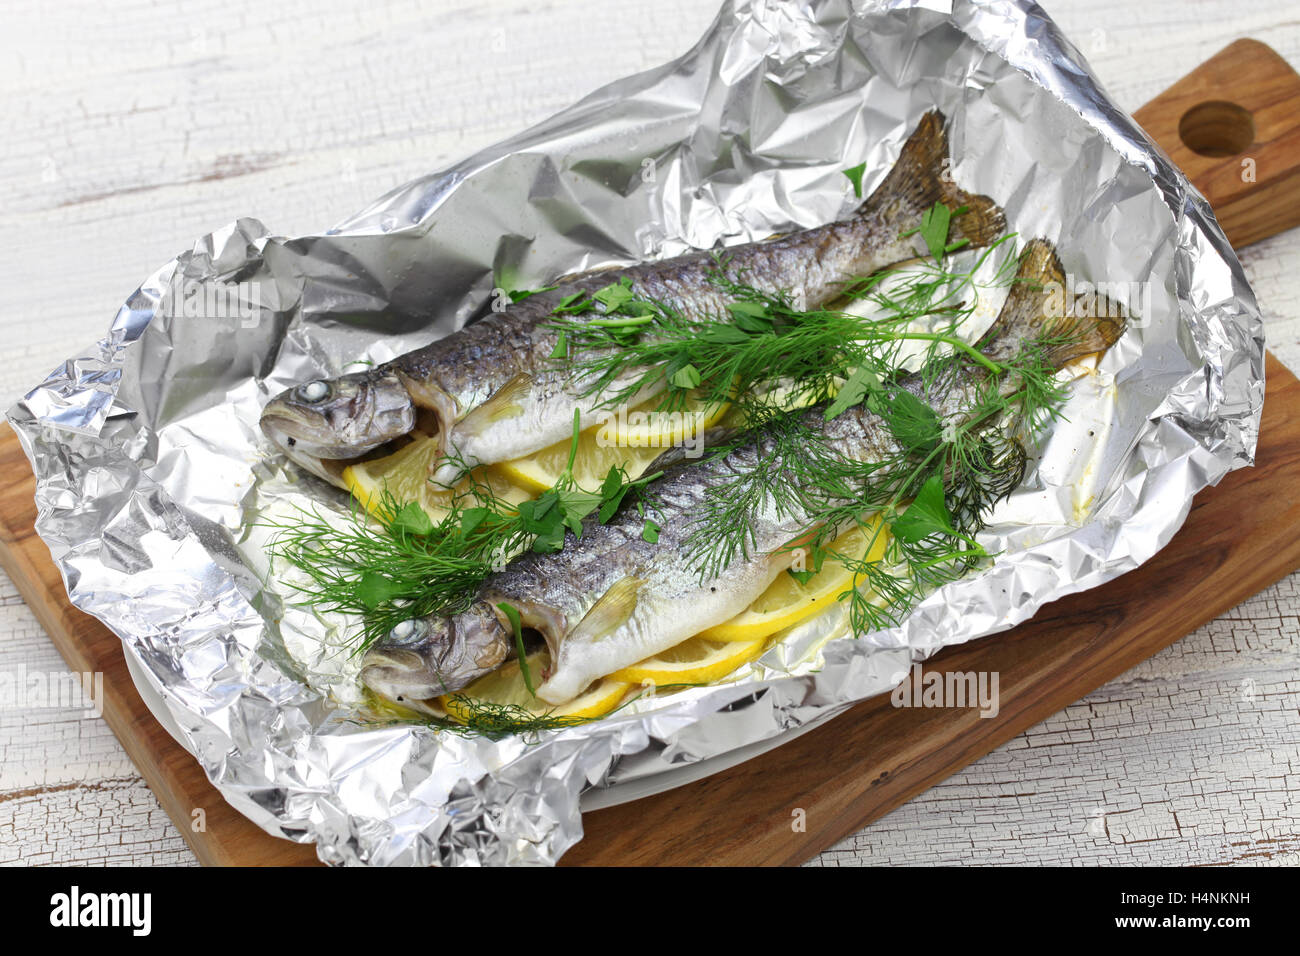 whole rainbow trout baked in foil on cutting board Stock Photo